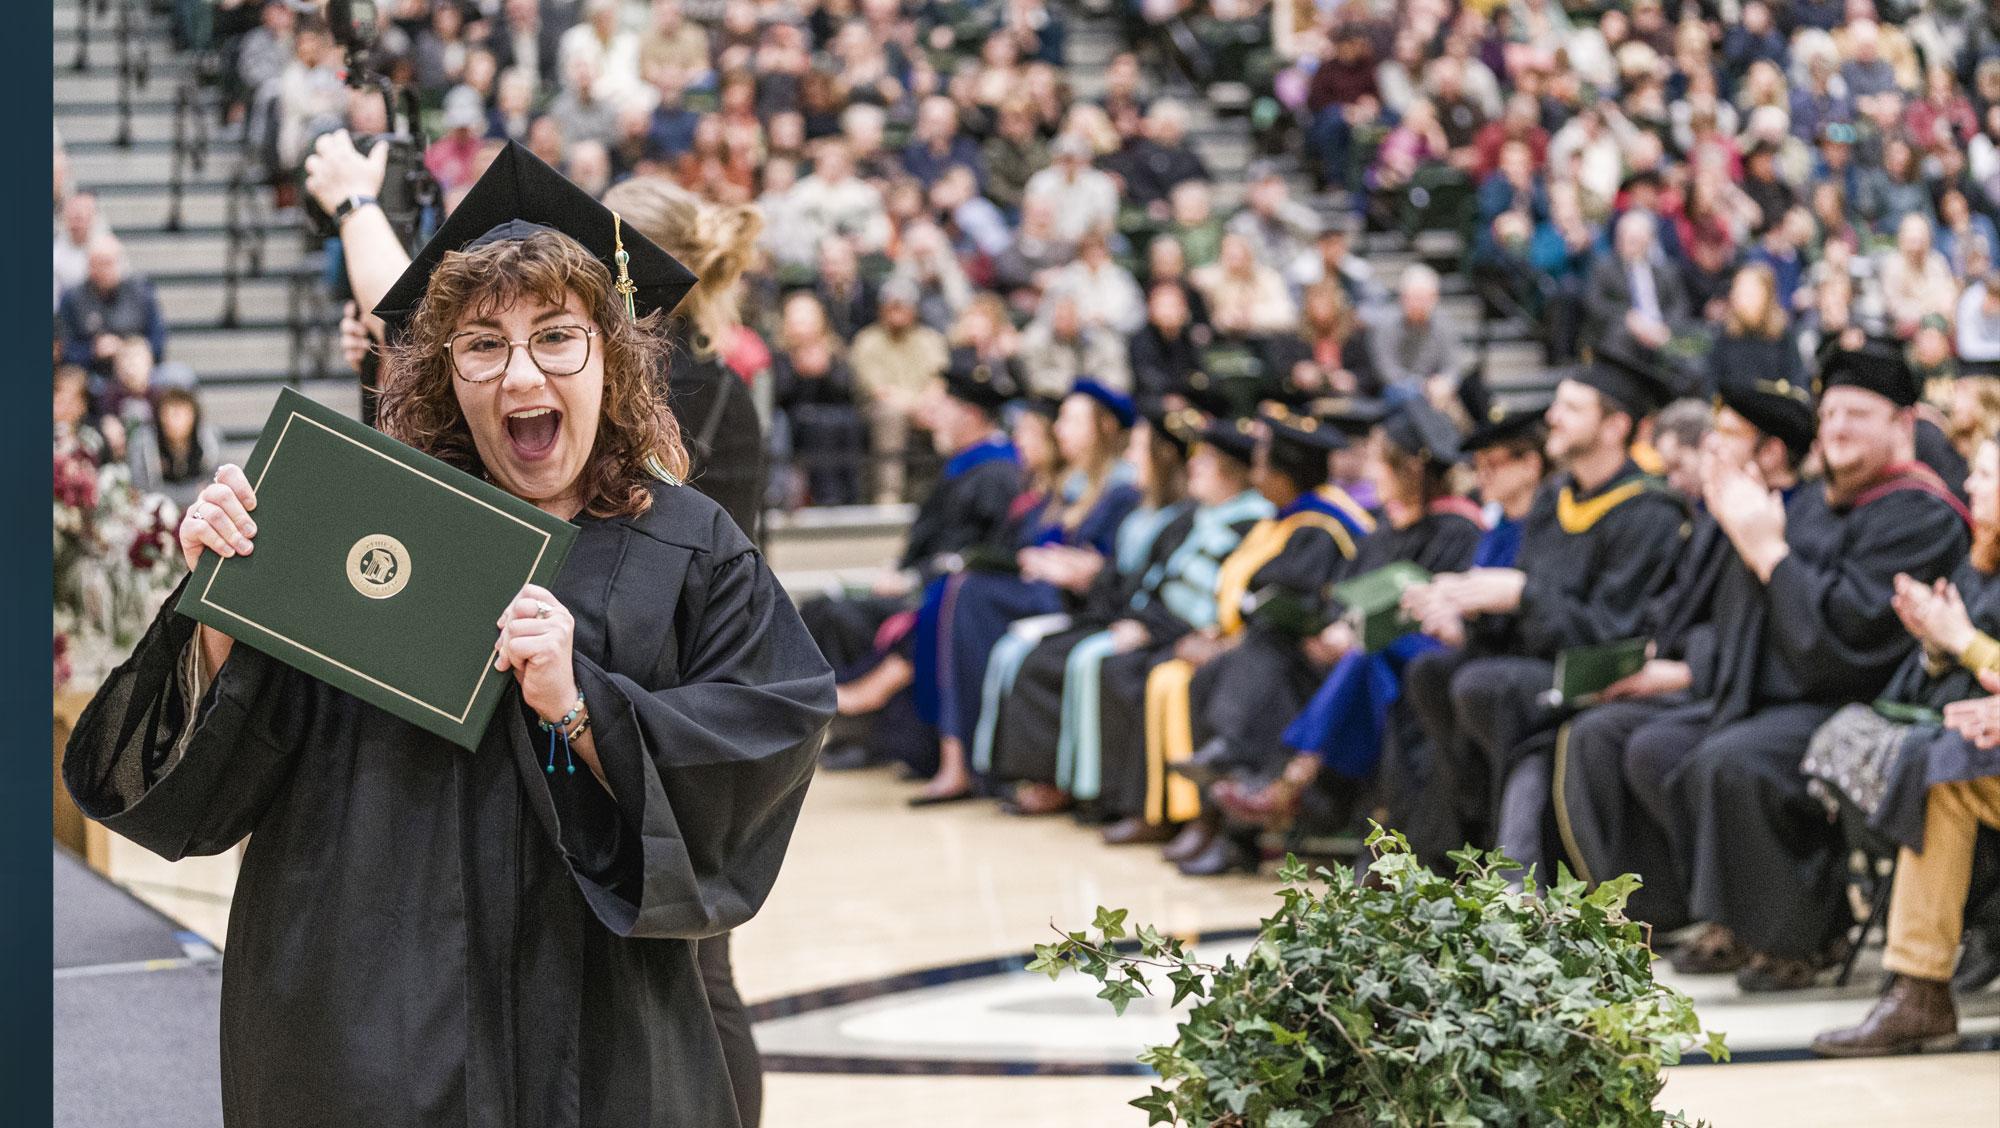 BHSU graduate poses smiling with degree at a commencement ceremony